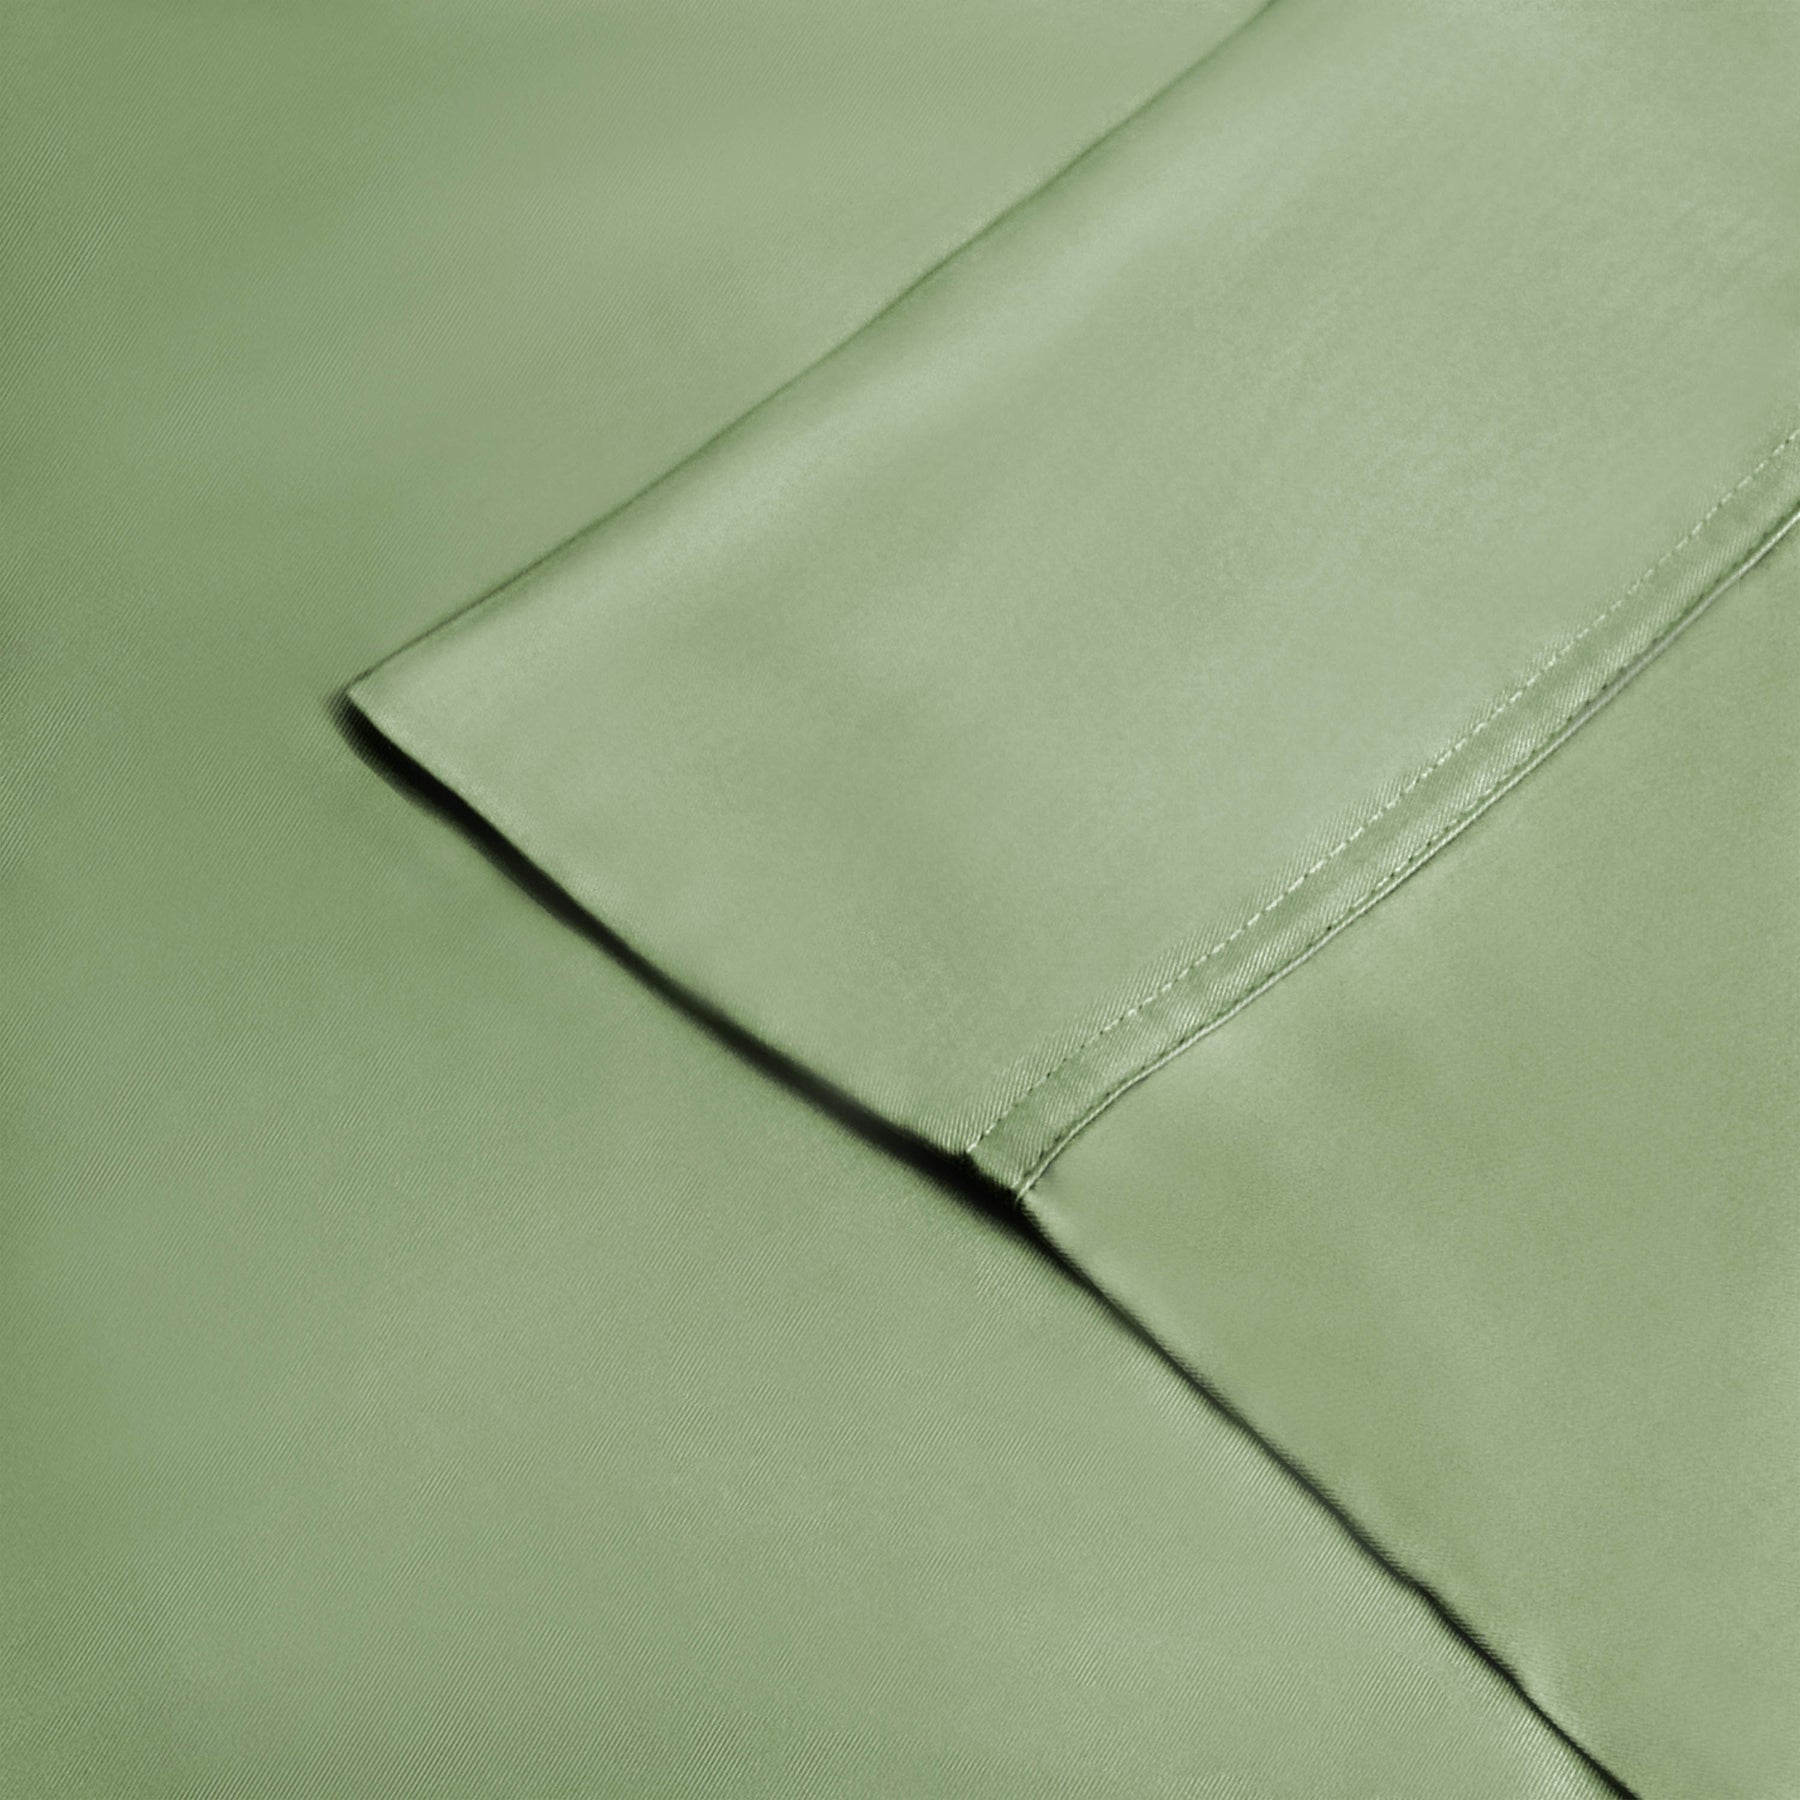 300 Thread Count Rayon From Bamboo Solid Deep Pocket Sheet Set - Sage